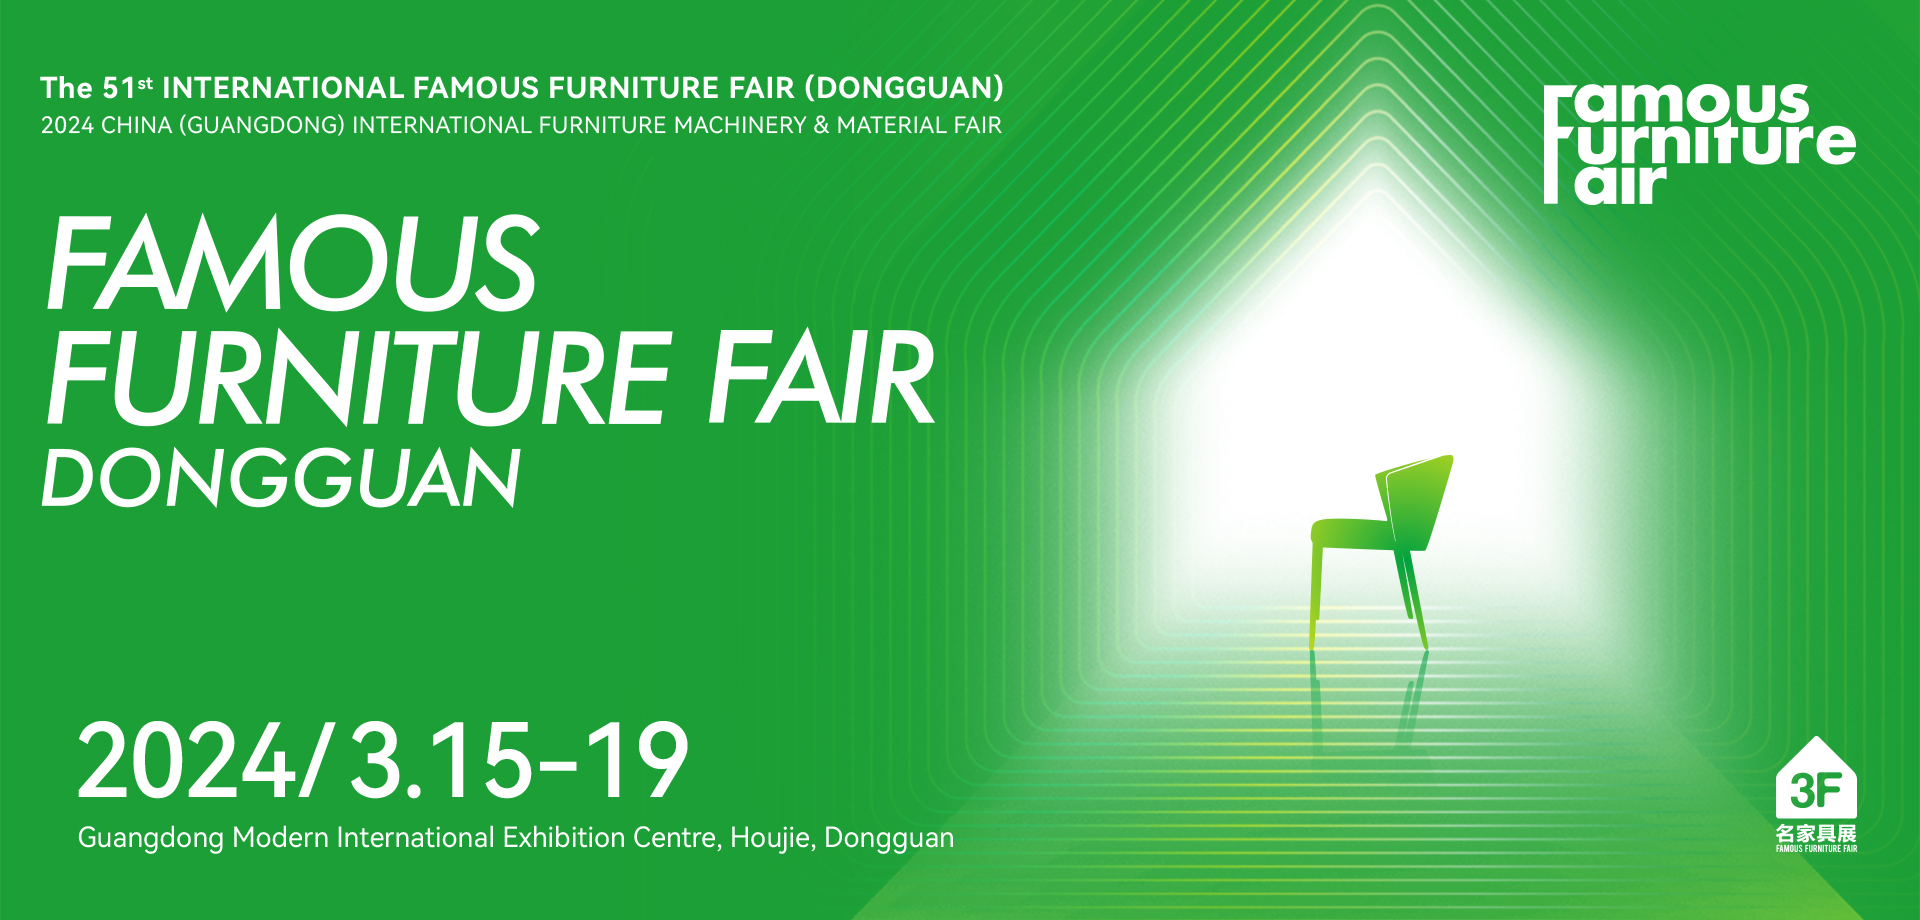 Lifestyle Home Decoration, Exhibition Furnishing -  Famous Furniture Fair